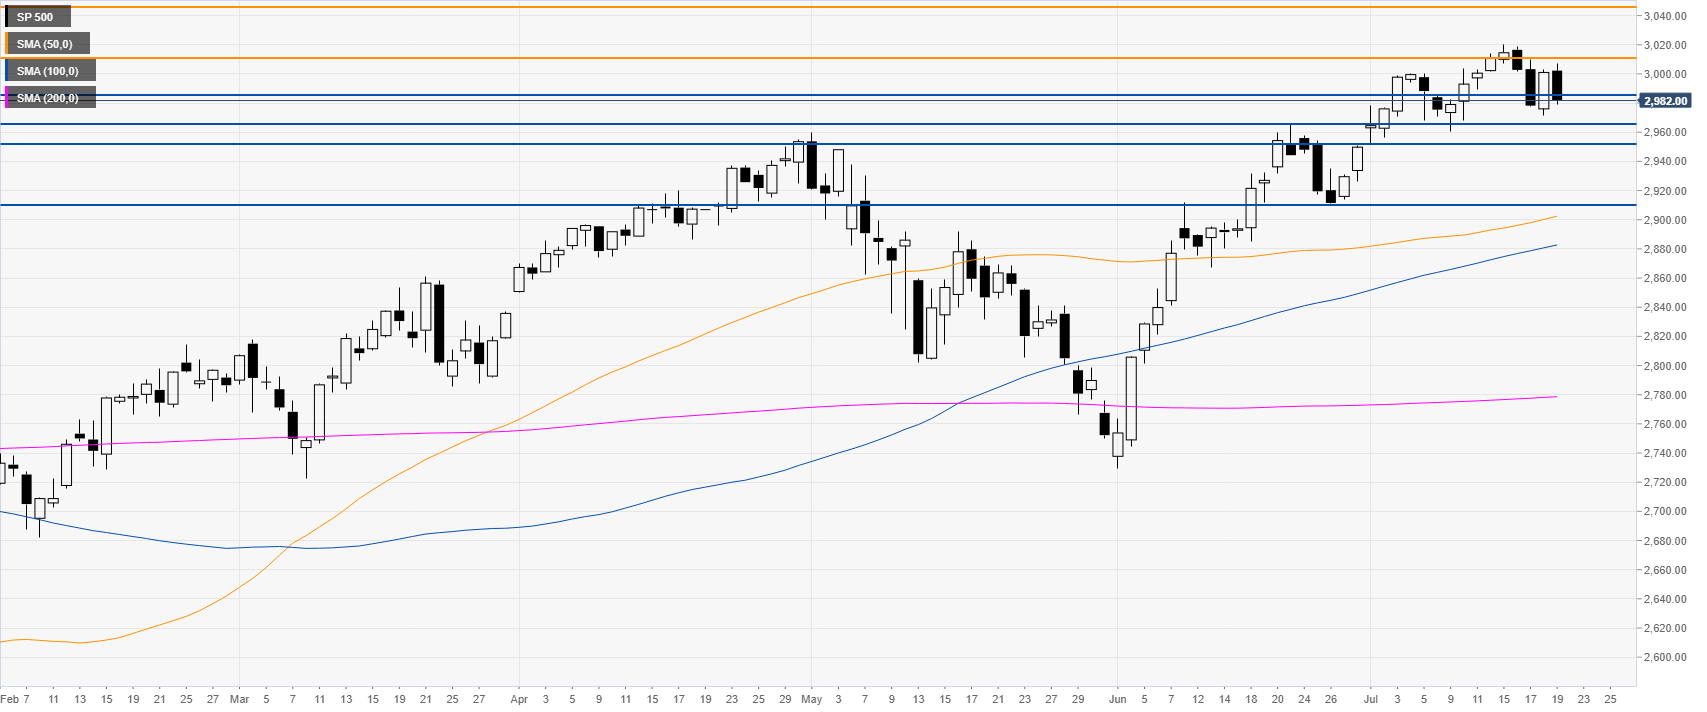 sp500 daily chart